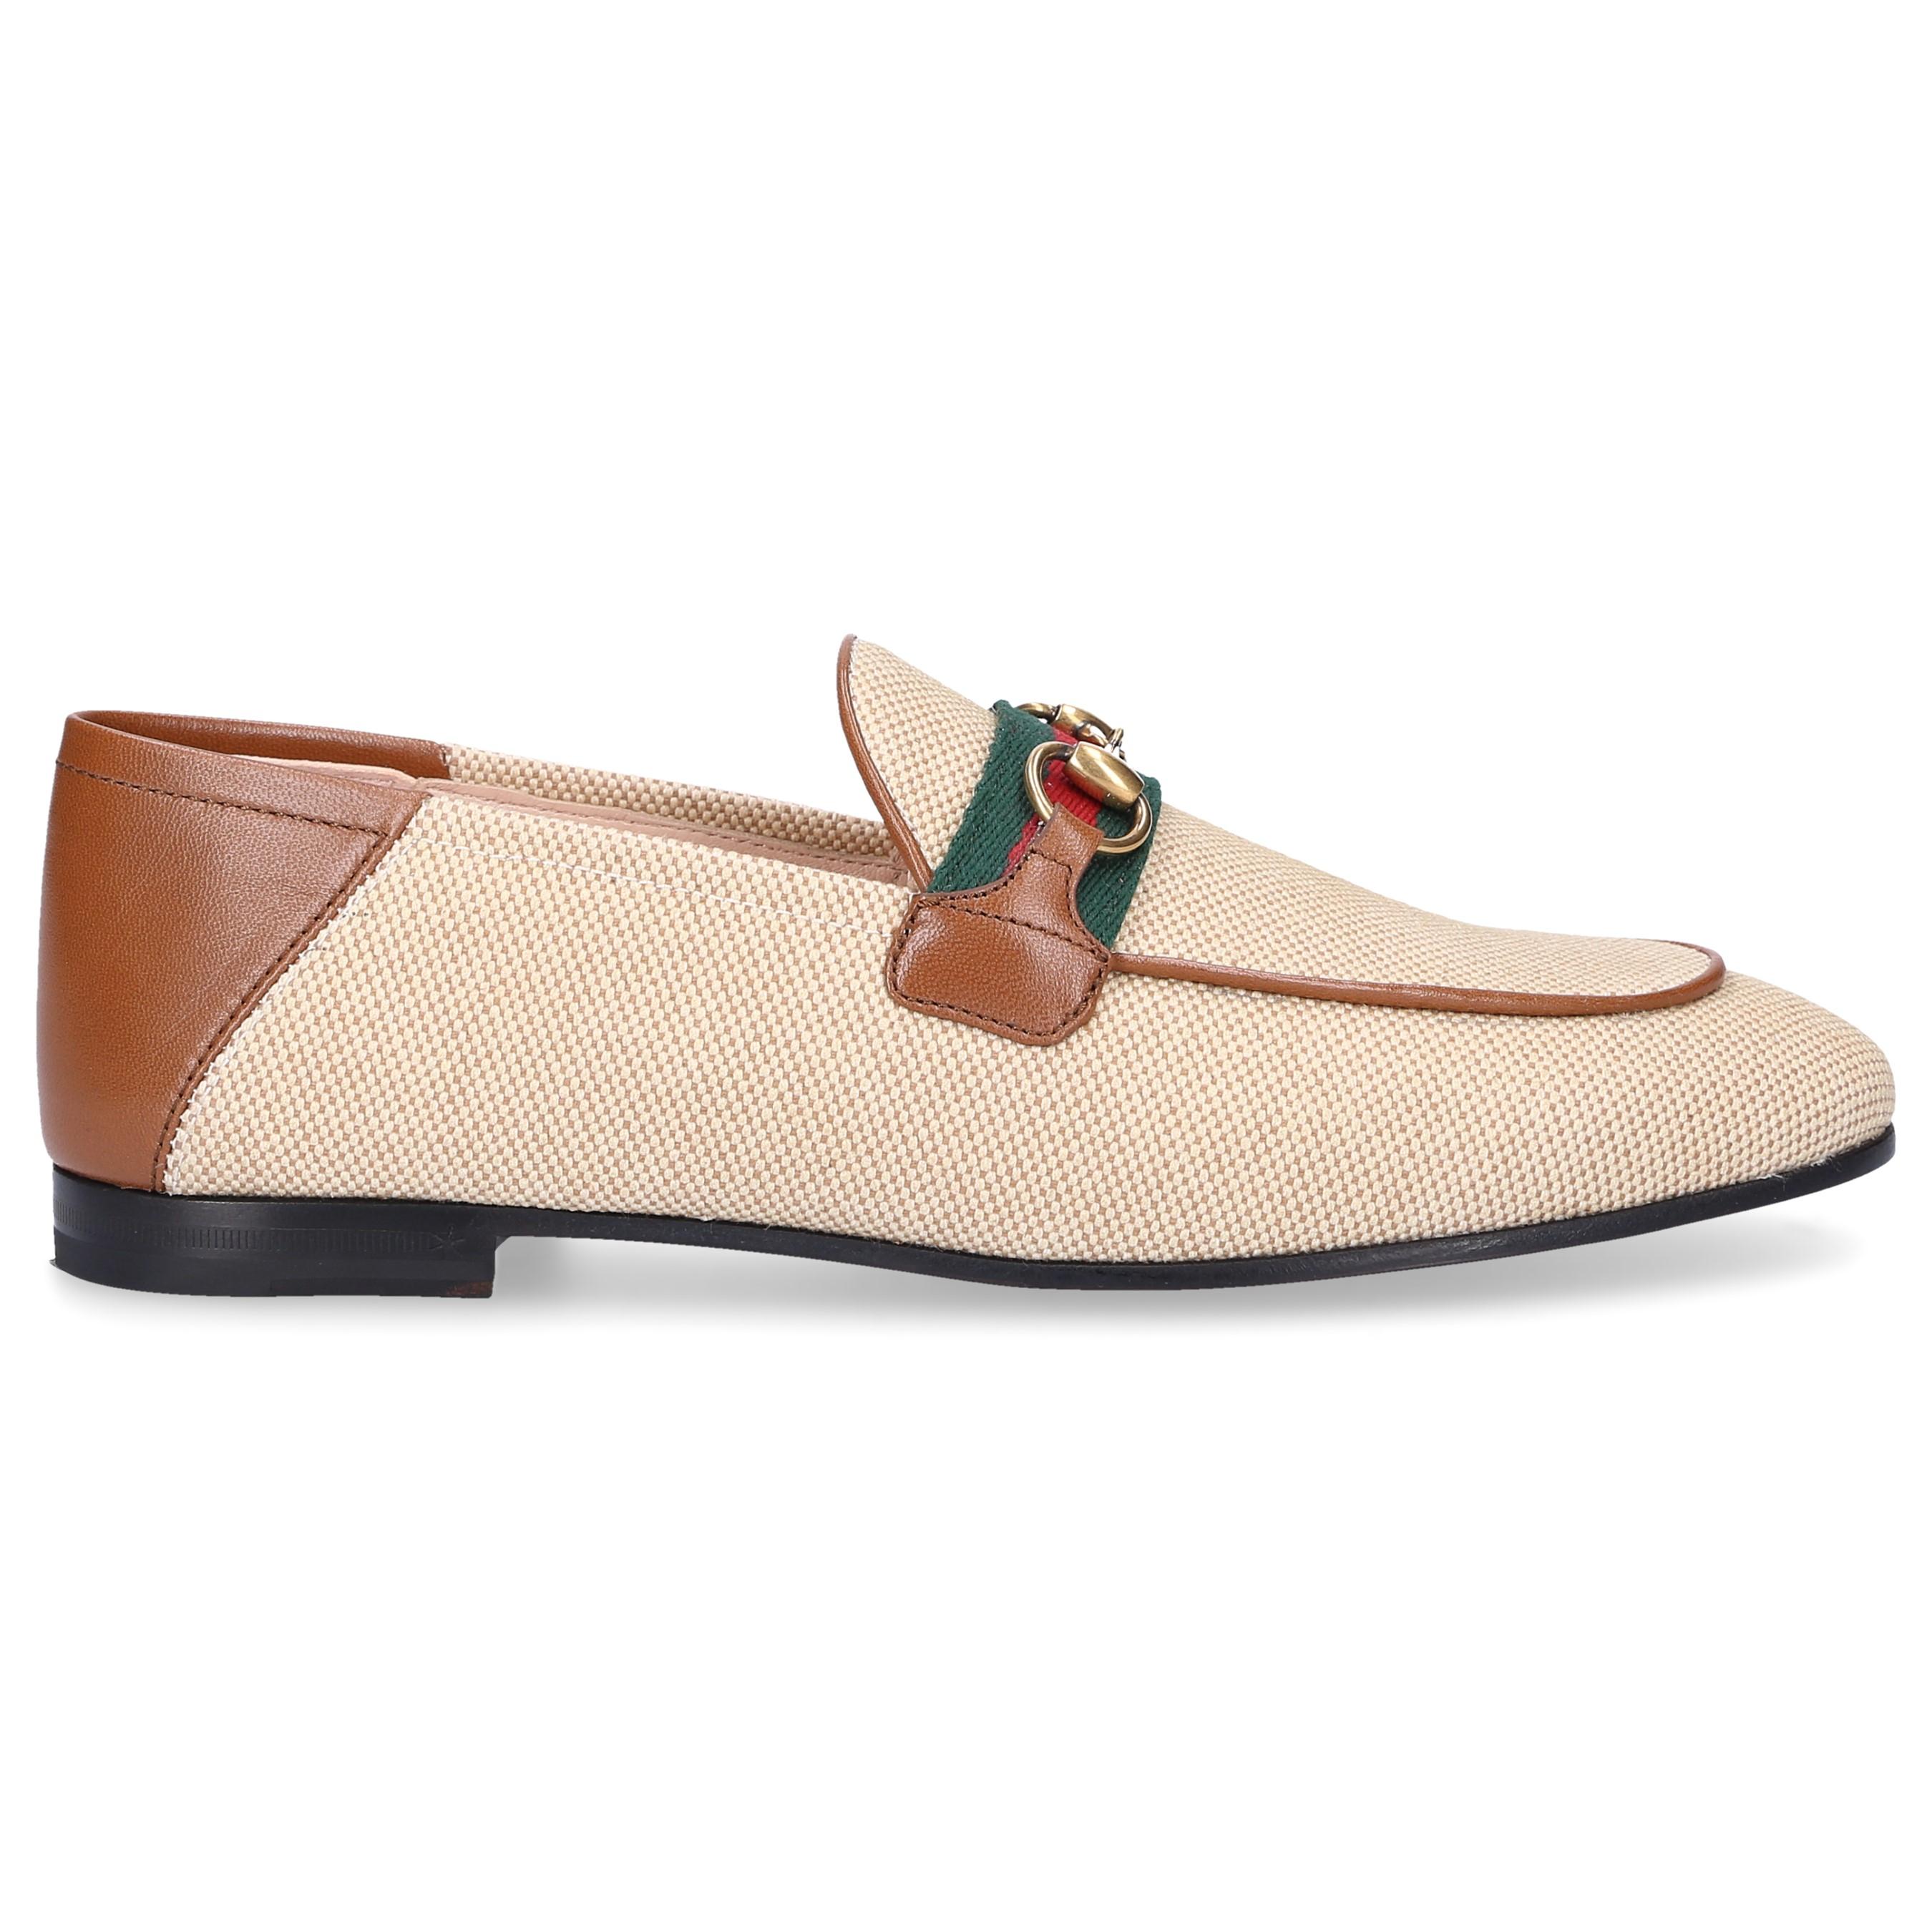 Gucci Slip On Shoes Canvas Charlotte Canvas Logo Metallic Beige in ...